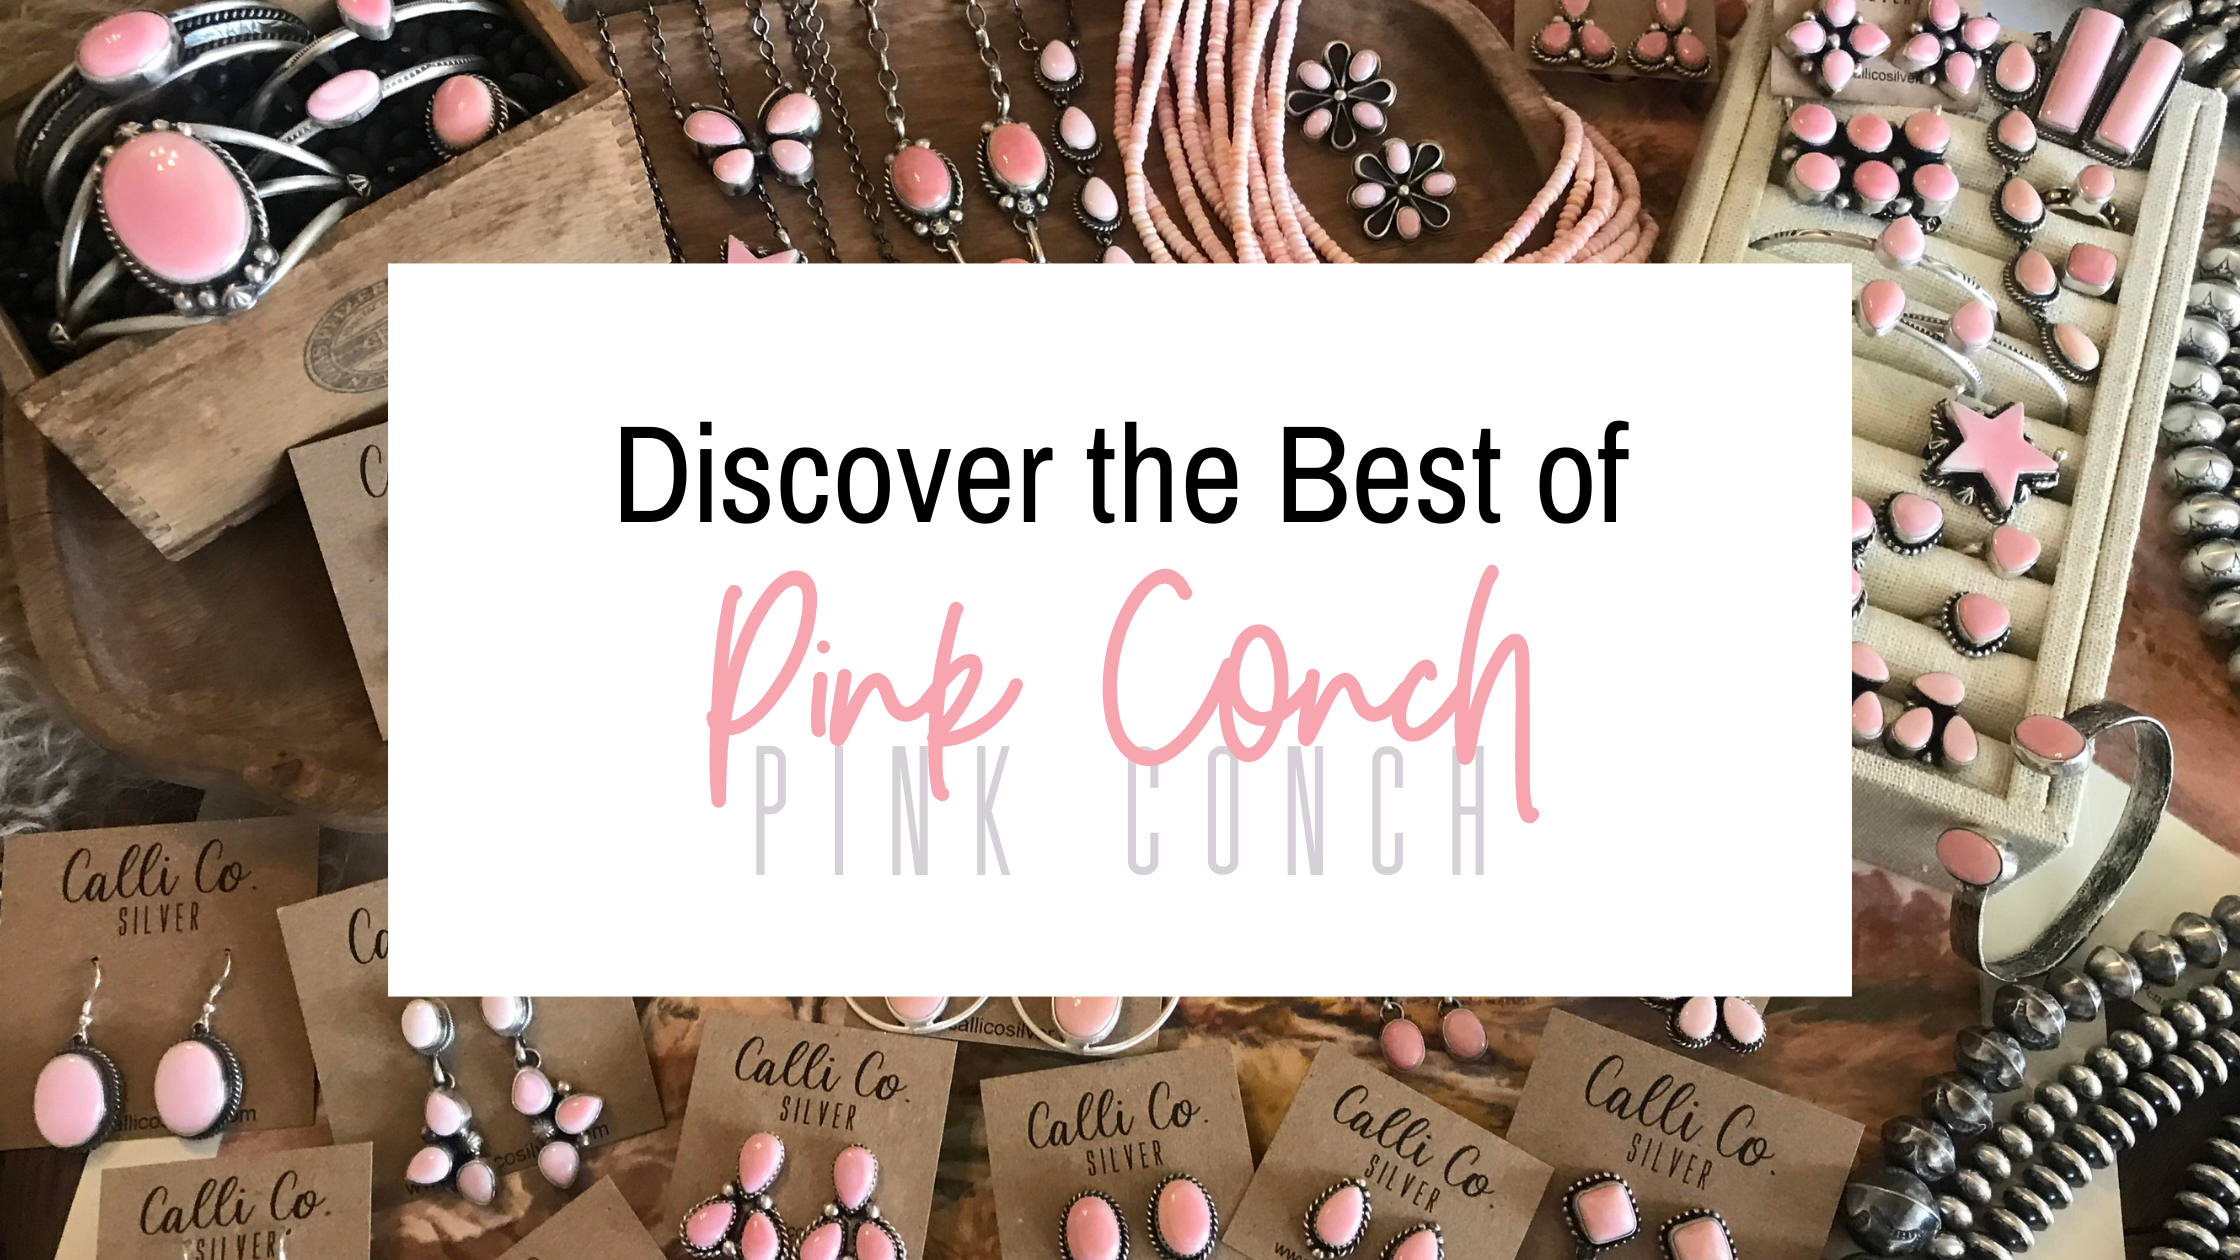 PINK CONCH JEWELRY COLLECTION | CALLI CO SILVER | TURQUOISE AND STERLING SILVER JEWELRY